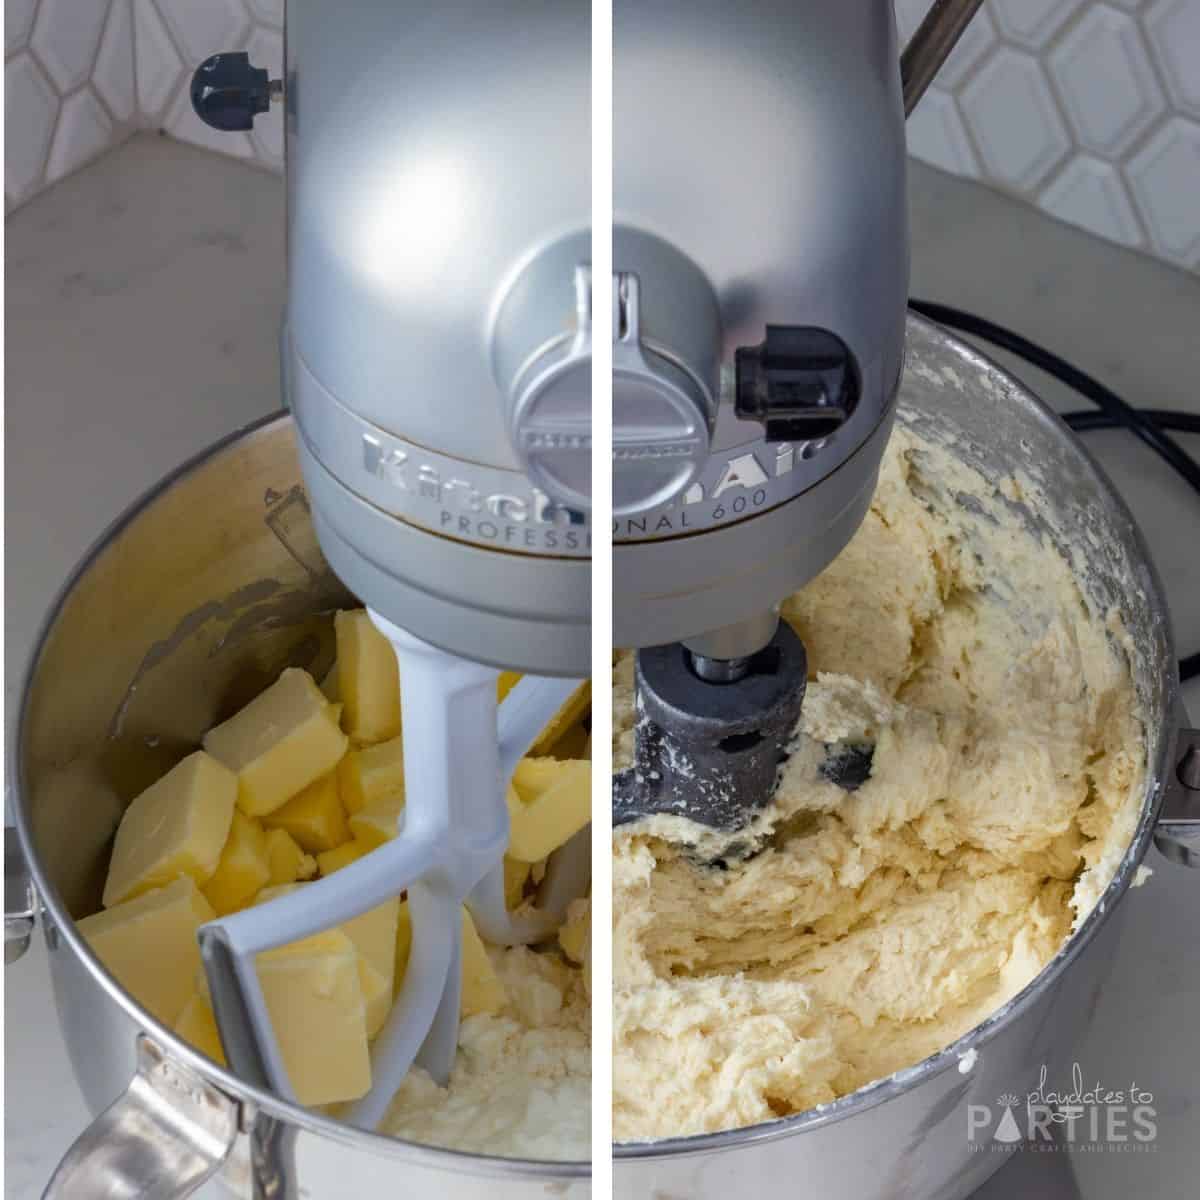 Mixing cookie dough in a stand mixer.